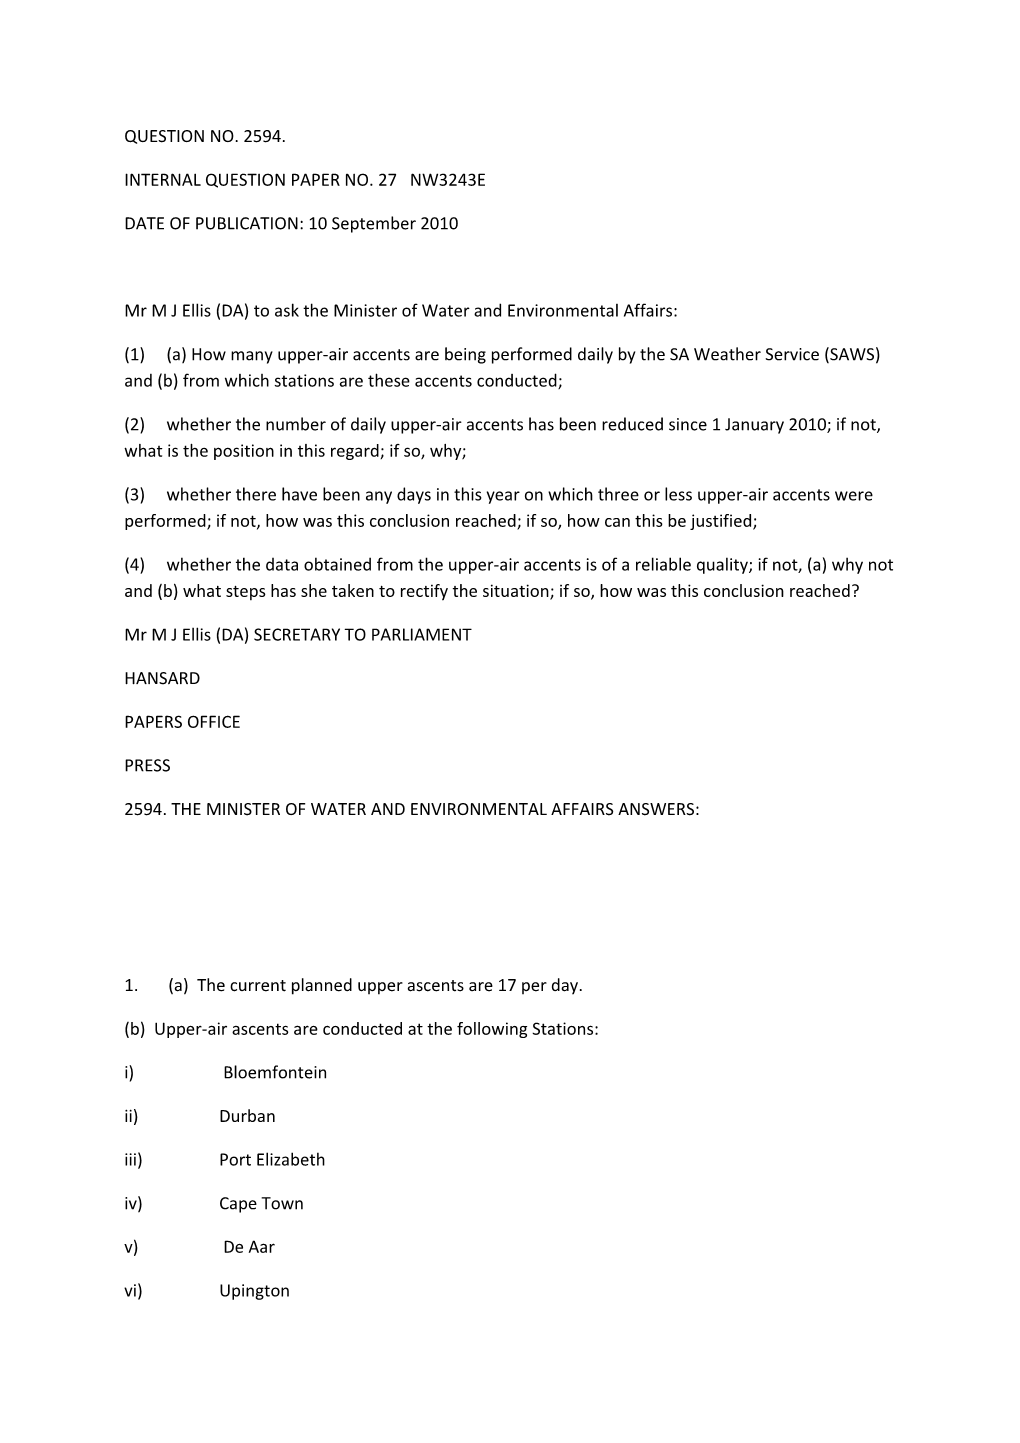 Mr M J Ellis (DA) to Ask the Minister of Water and Environmental Affairs